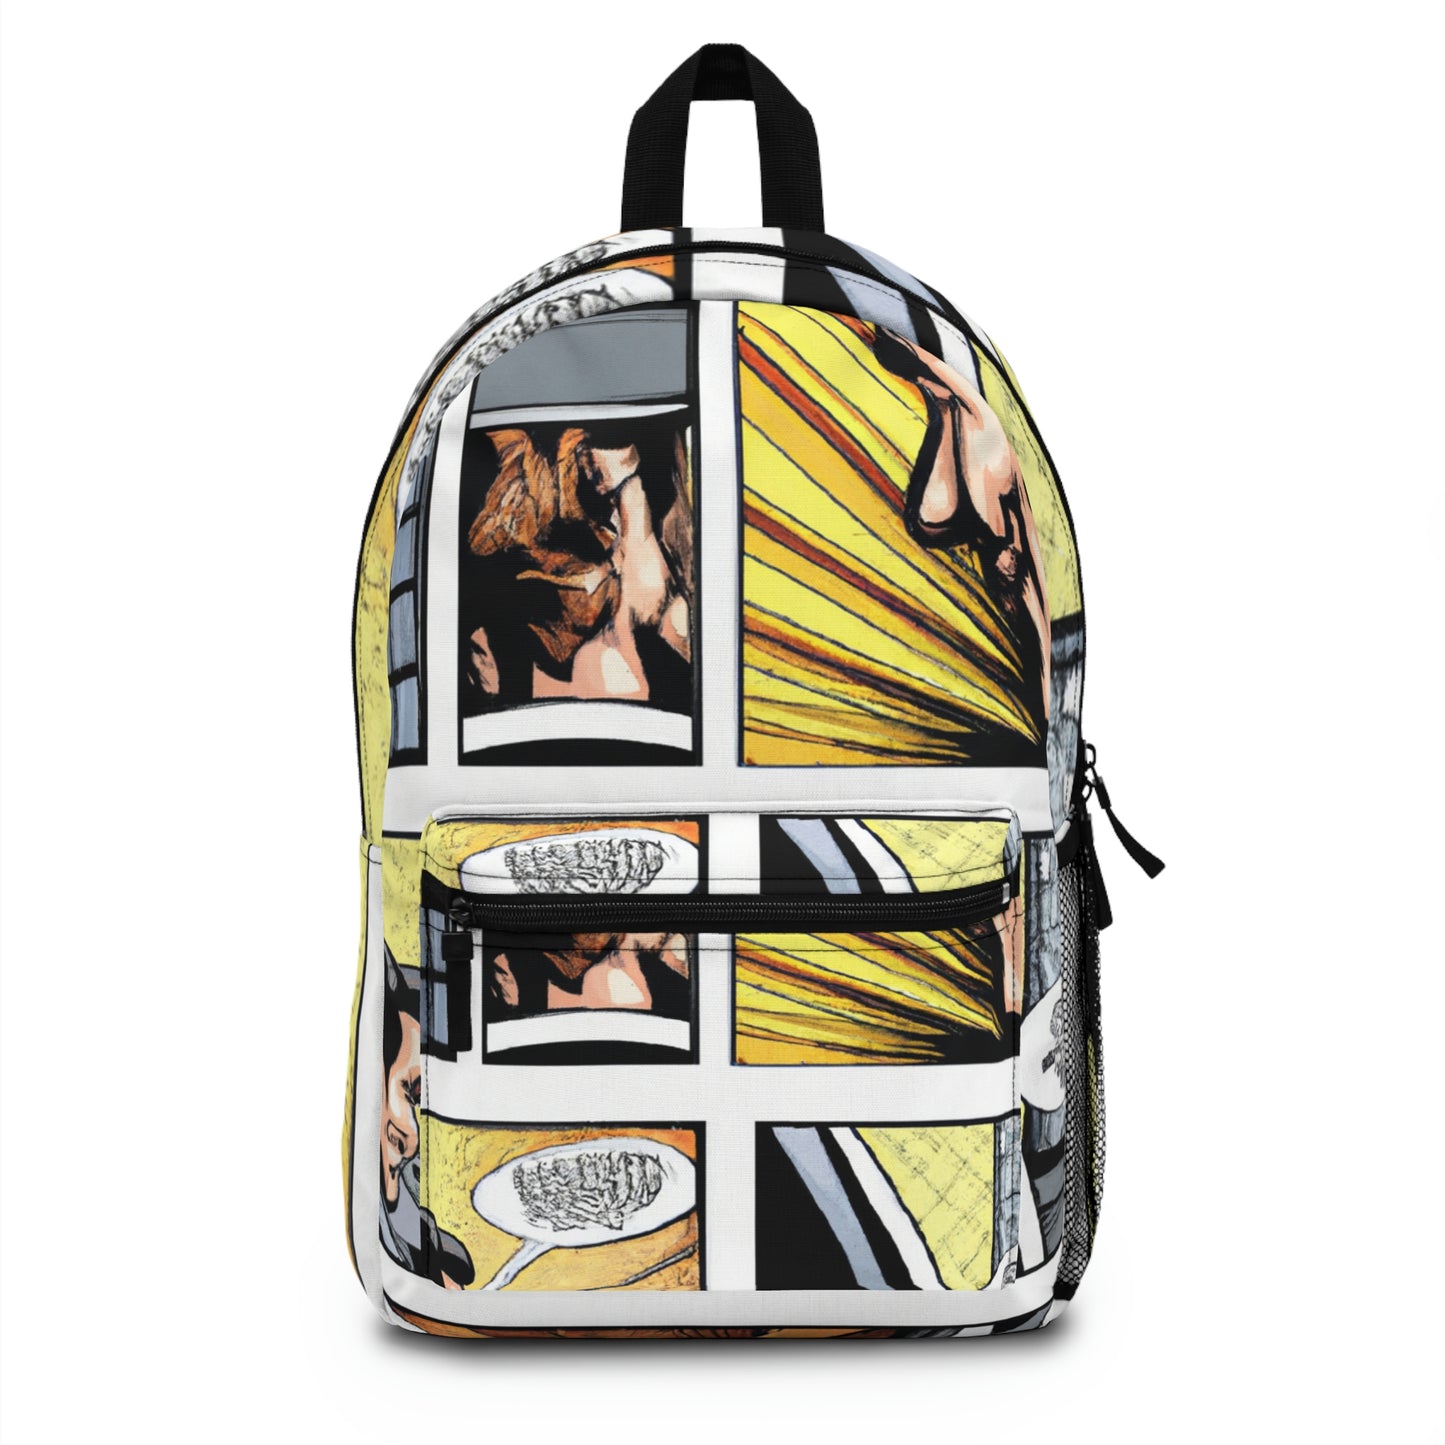 Supersonic Sparky - Comic Book Backpack